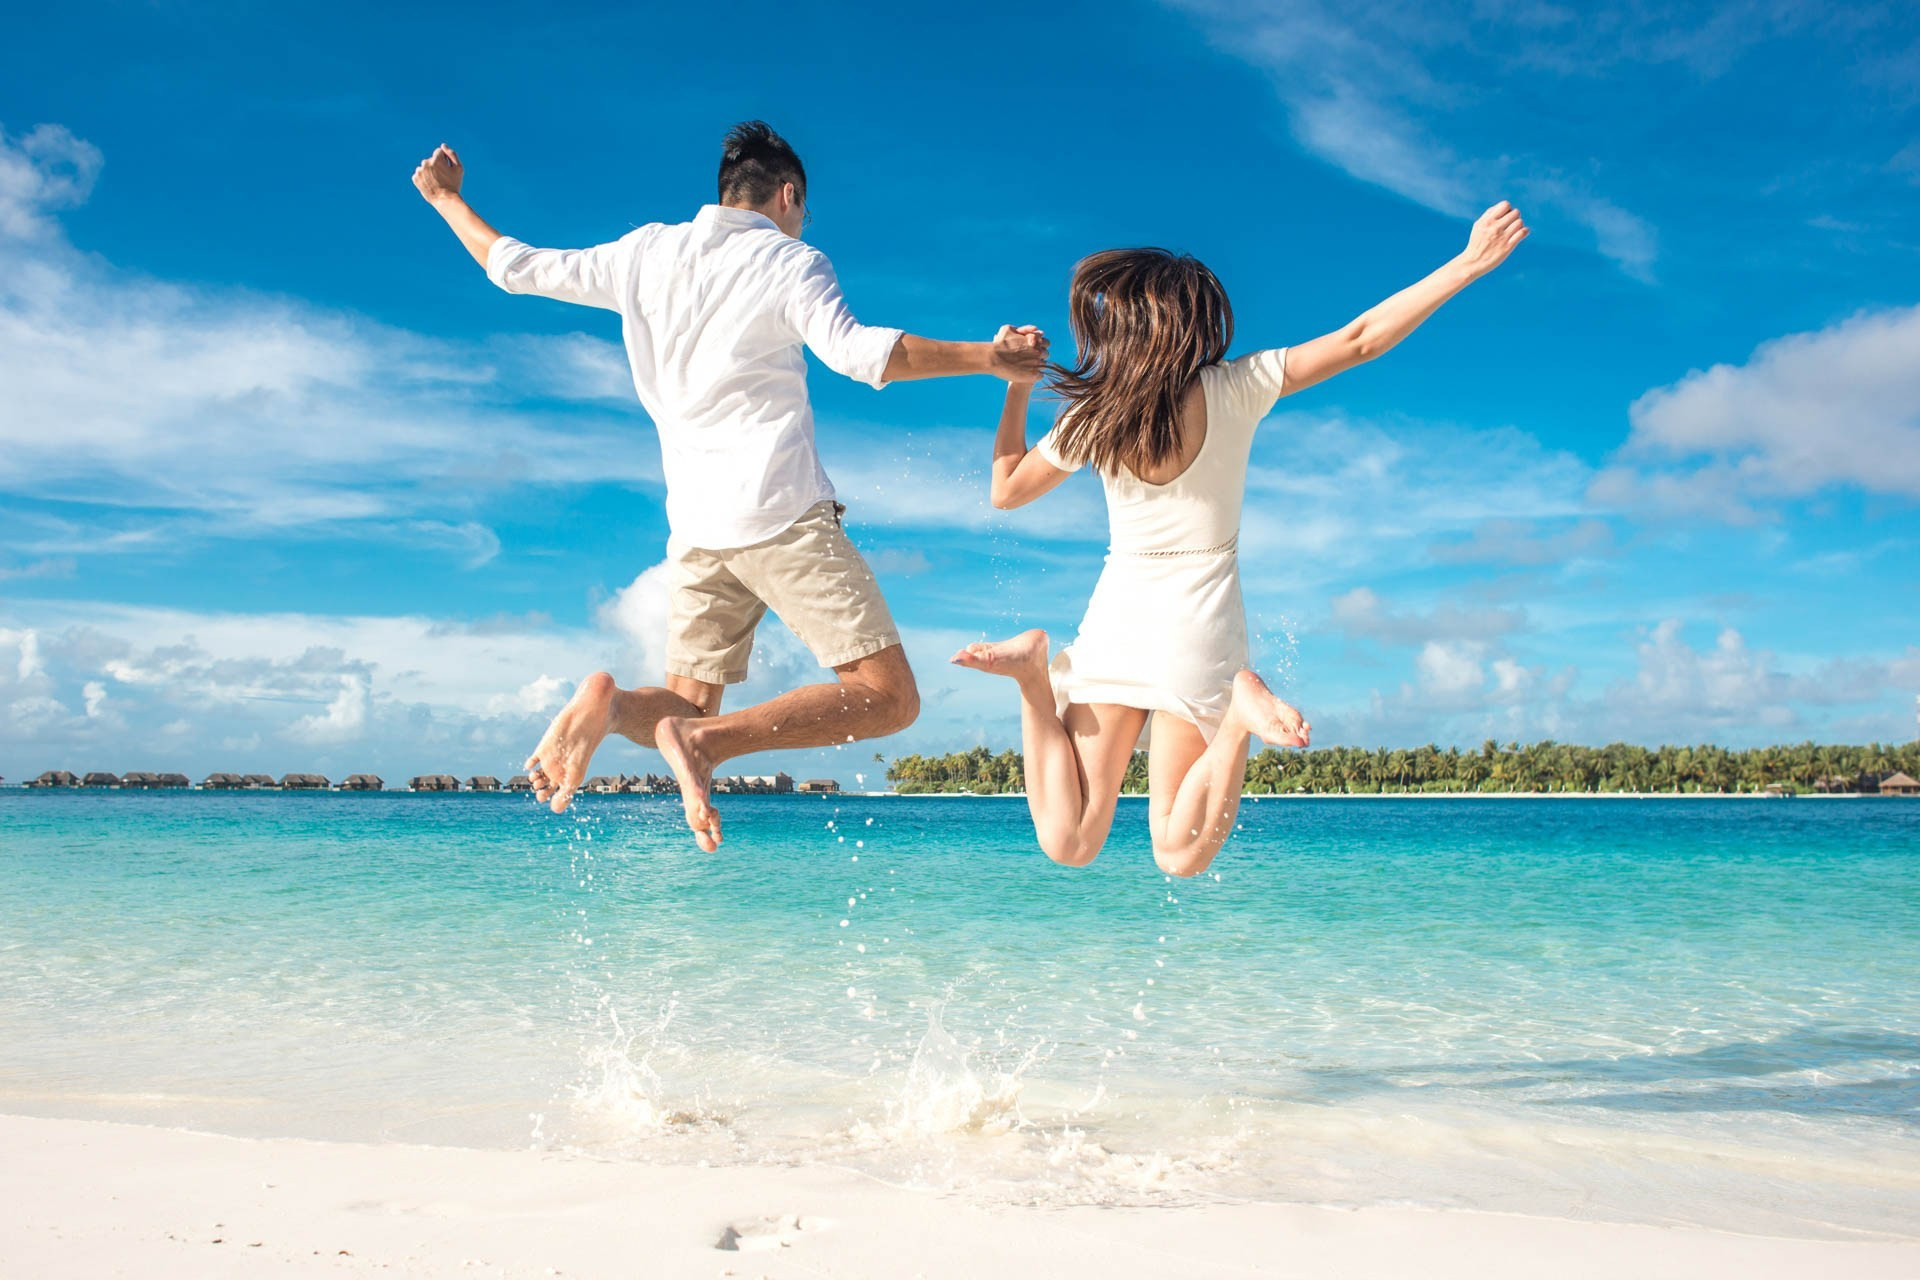 Maldives Resorts Introduce Share Your Moments